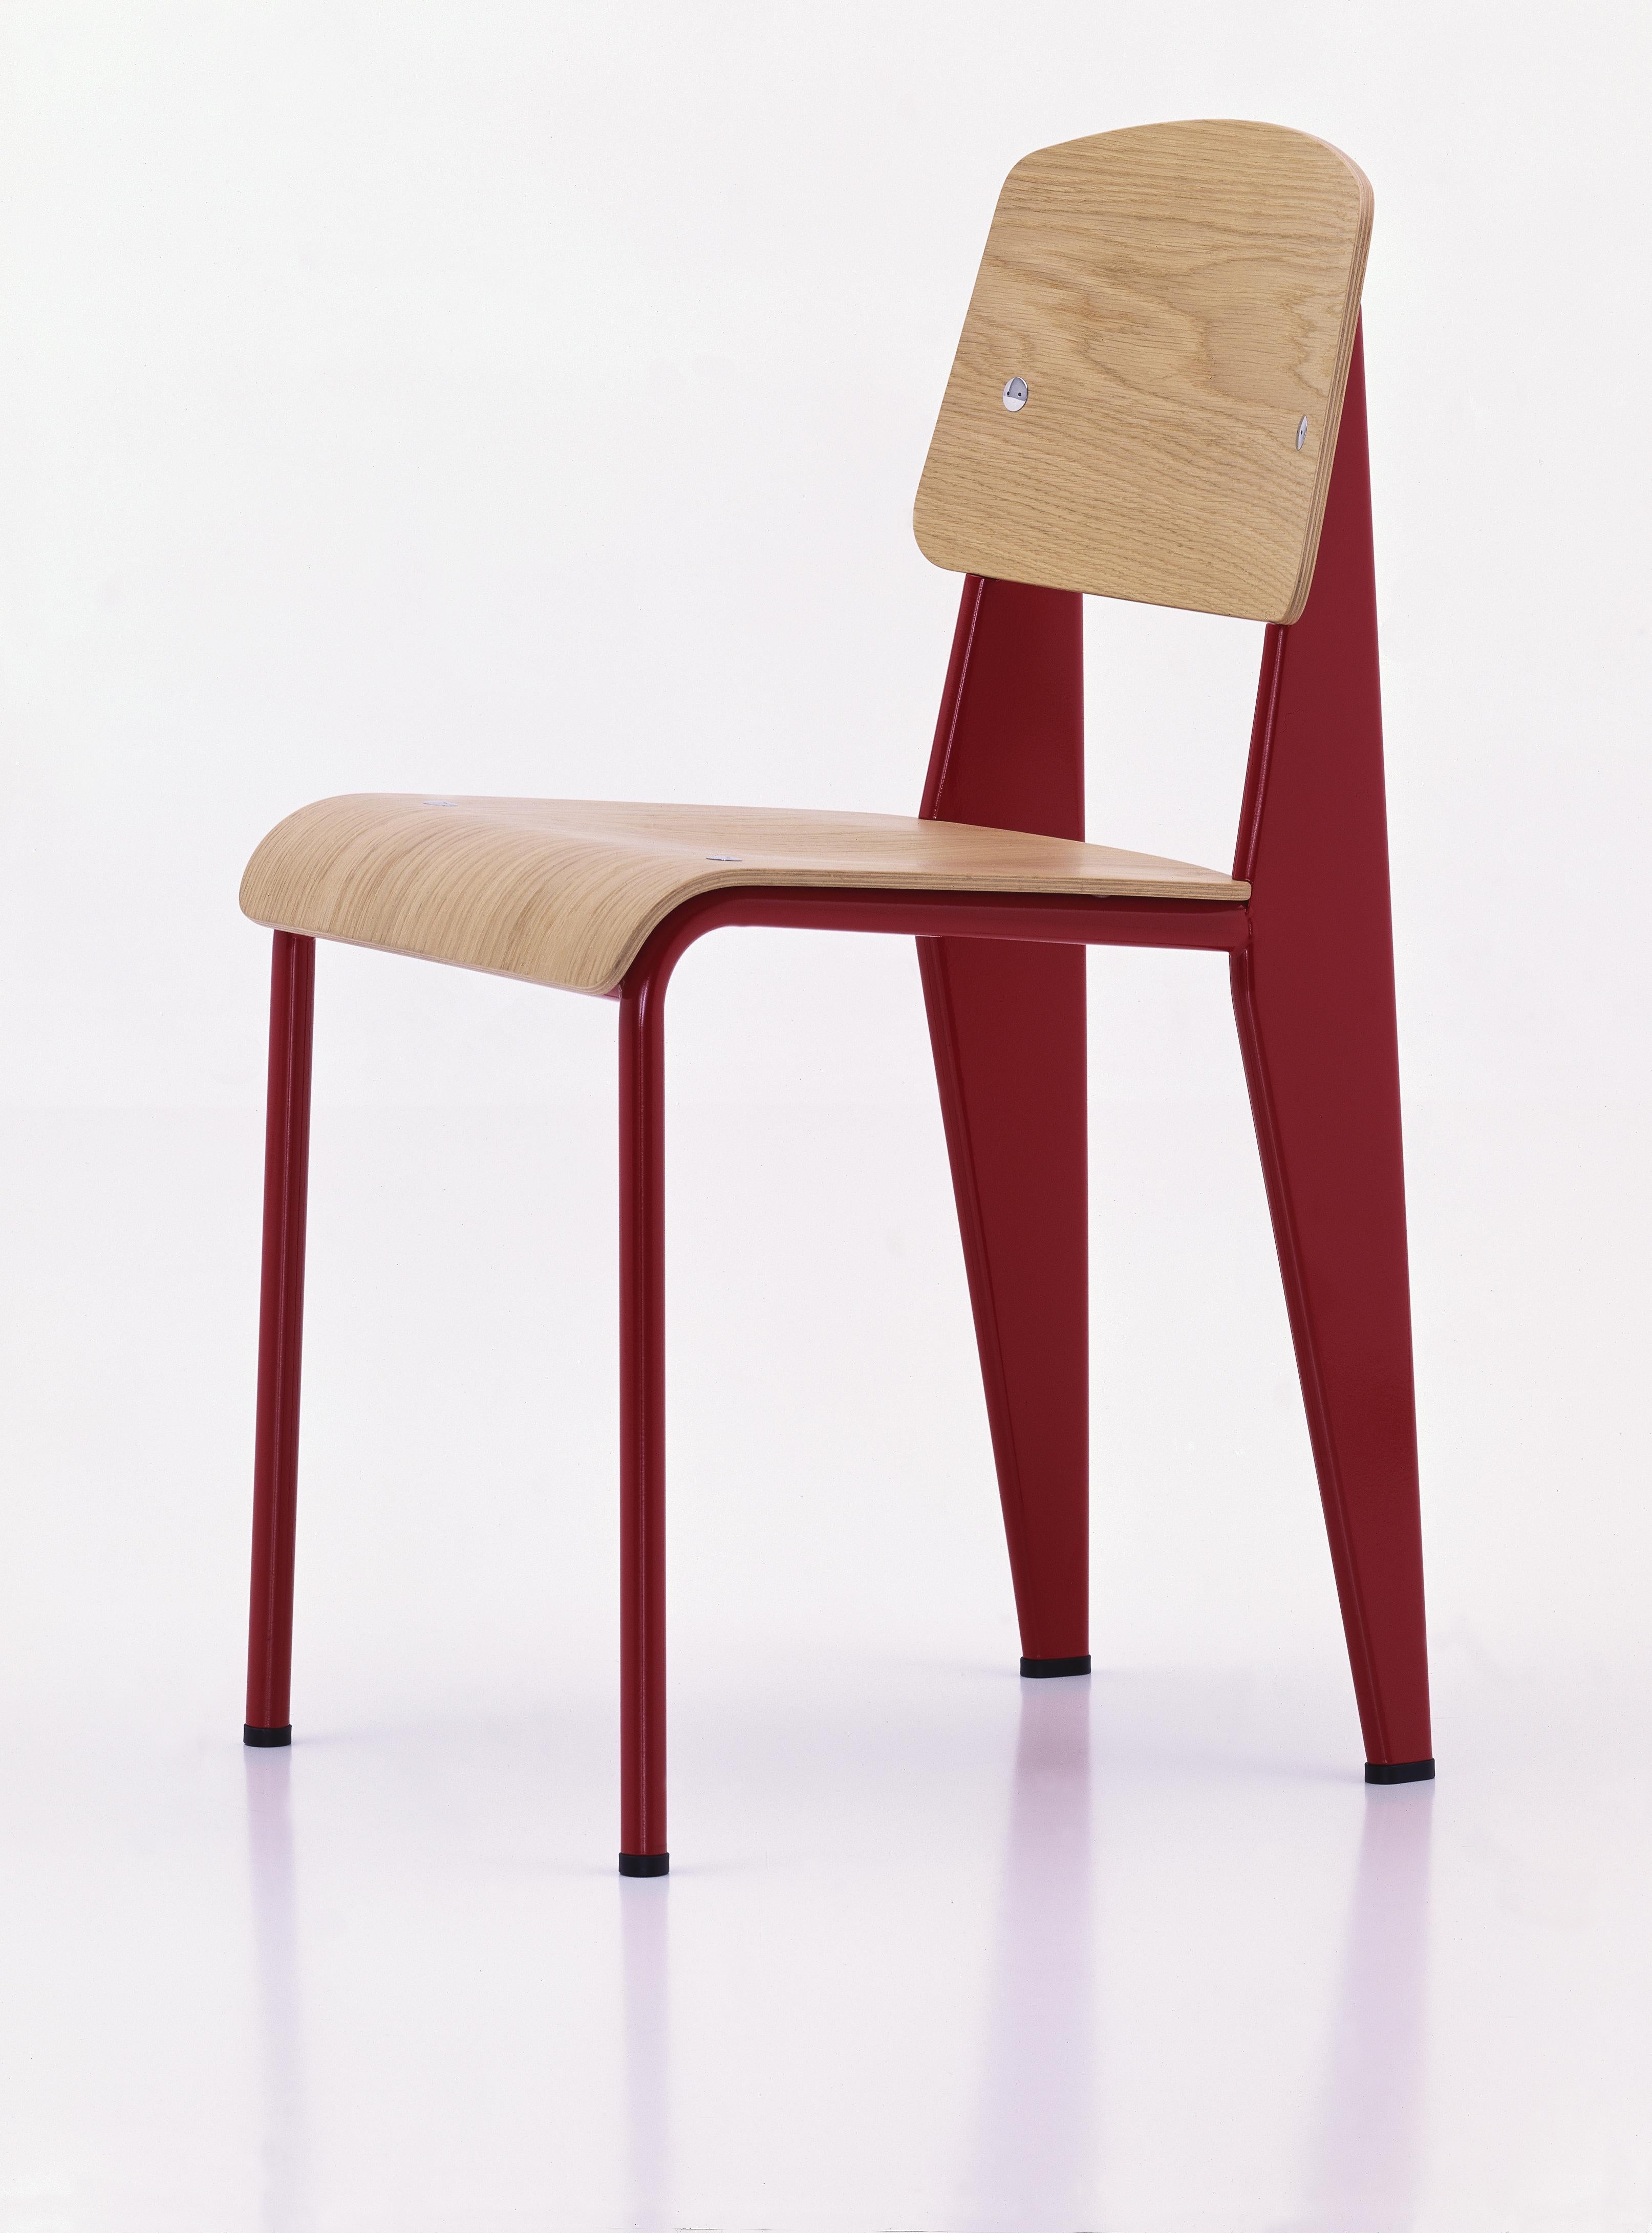 Modern Vitra Standard Chair in Natural Oak and Japanese Red by Jean Prouvé For Sale